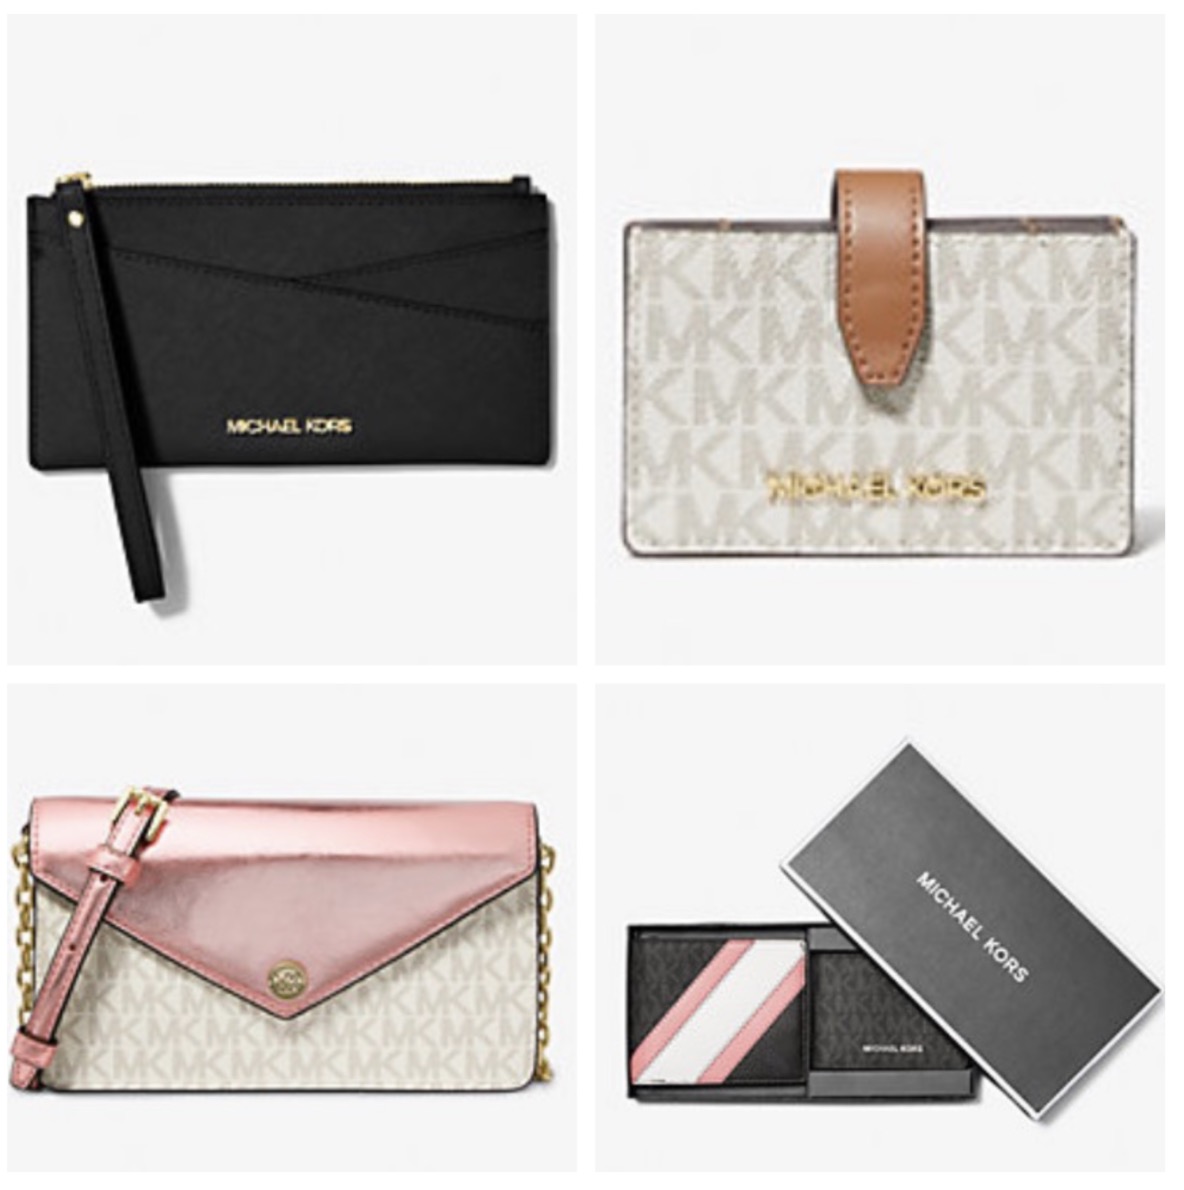 Michael Kors Sale: Wallets as little as $26.04 shipped, plus extra!